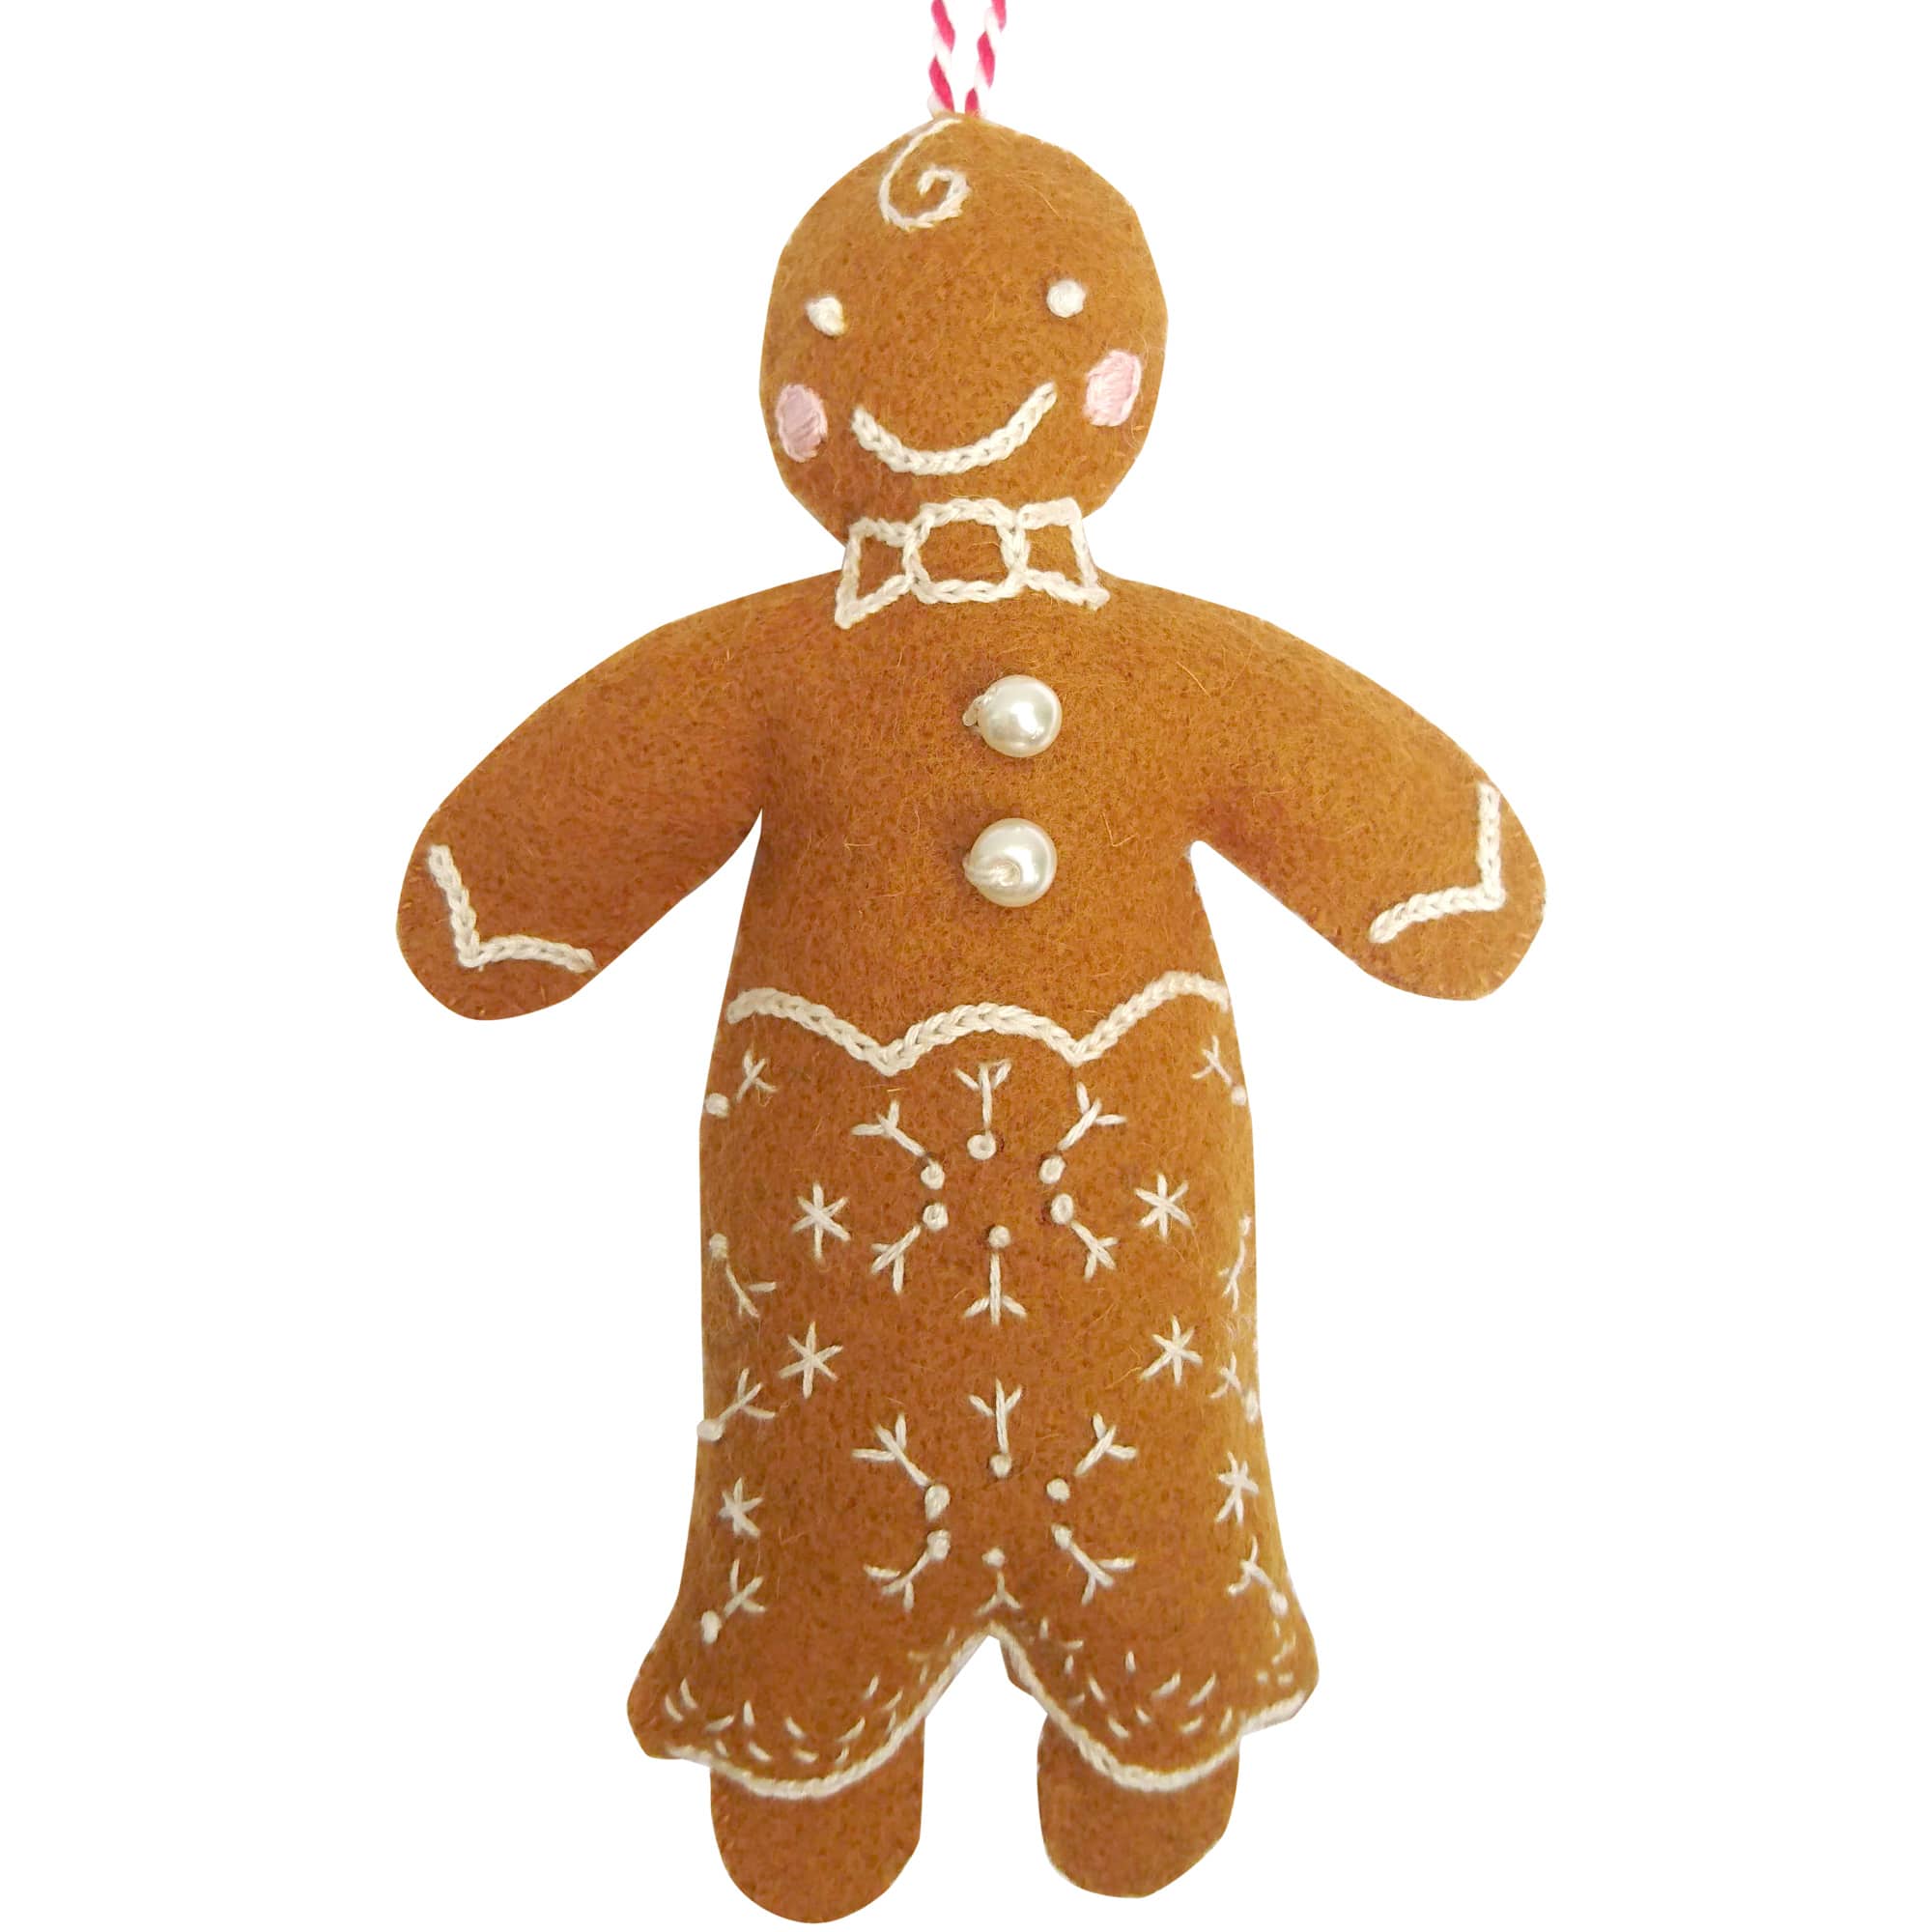 Fine-Cell-Work-Handmade-Charity-Christmas-Decoration-Embroidered-Gingerbread-Man.jpg